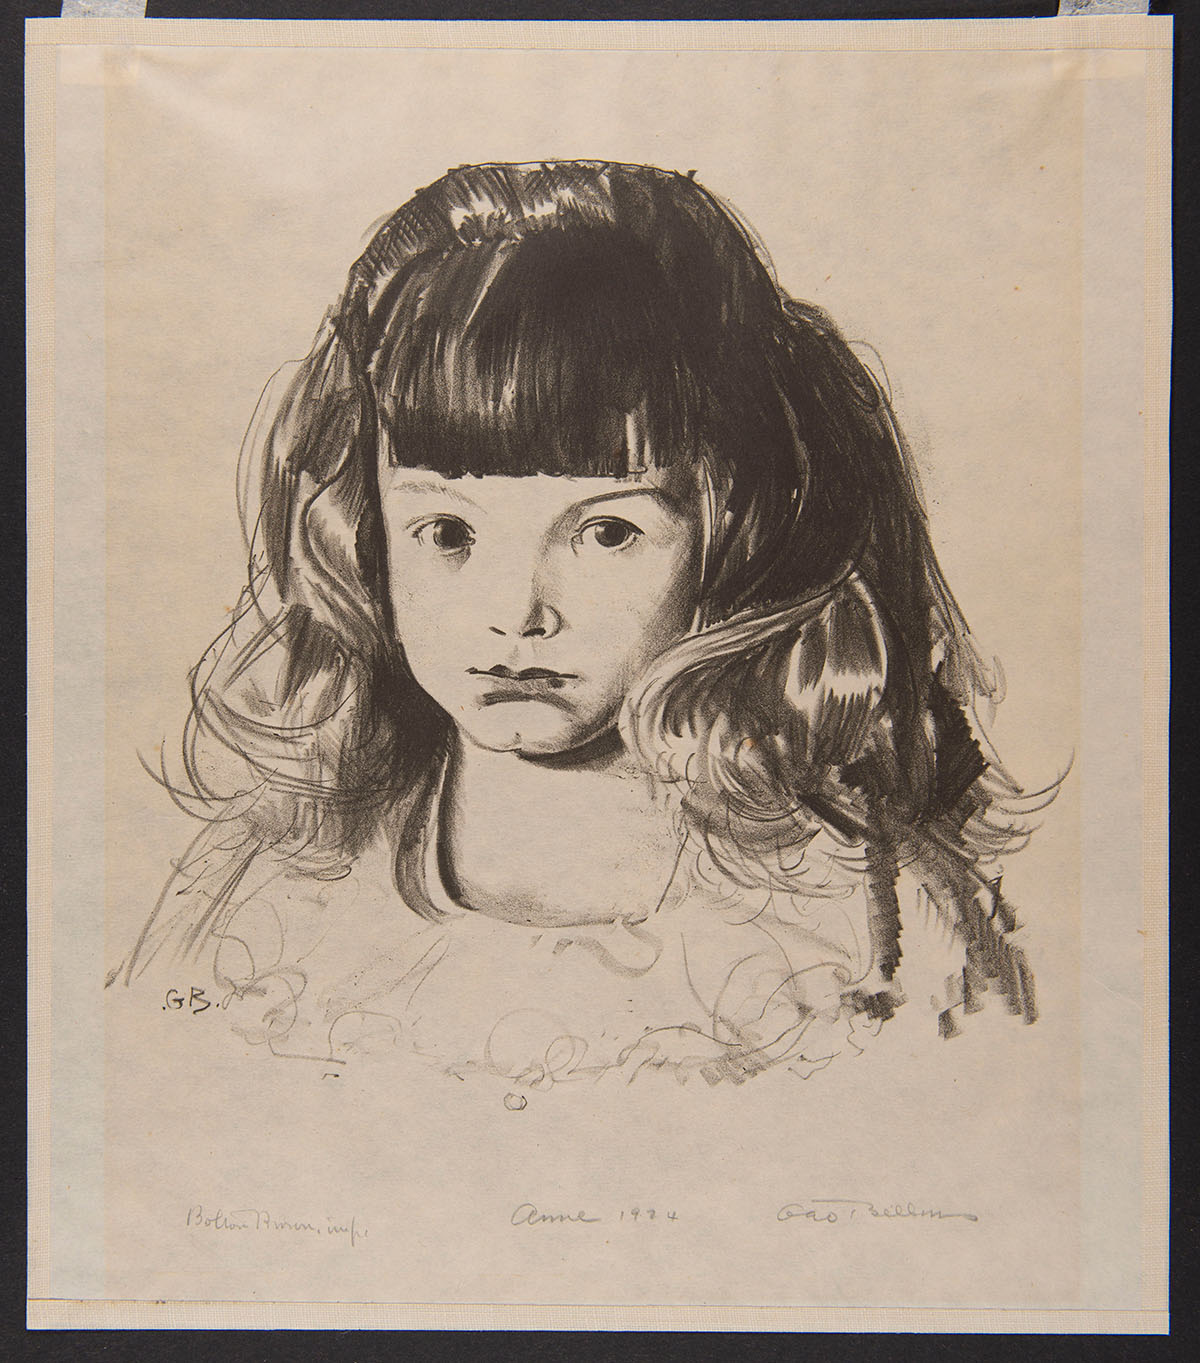 A simple illustration of a young girl. The paper is yellowed.